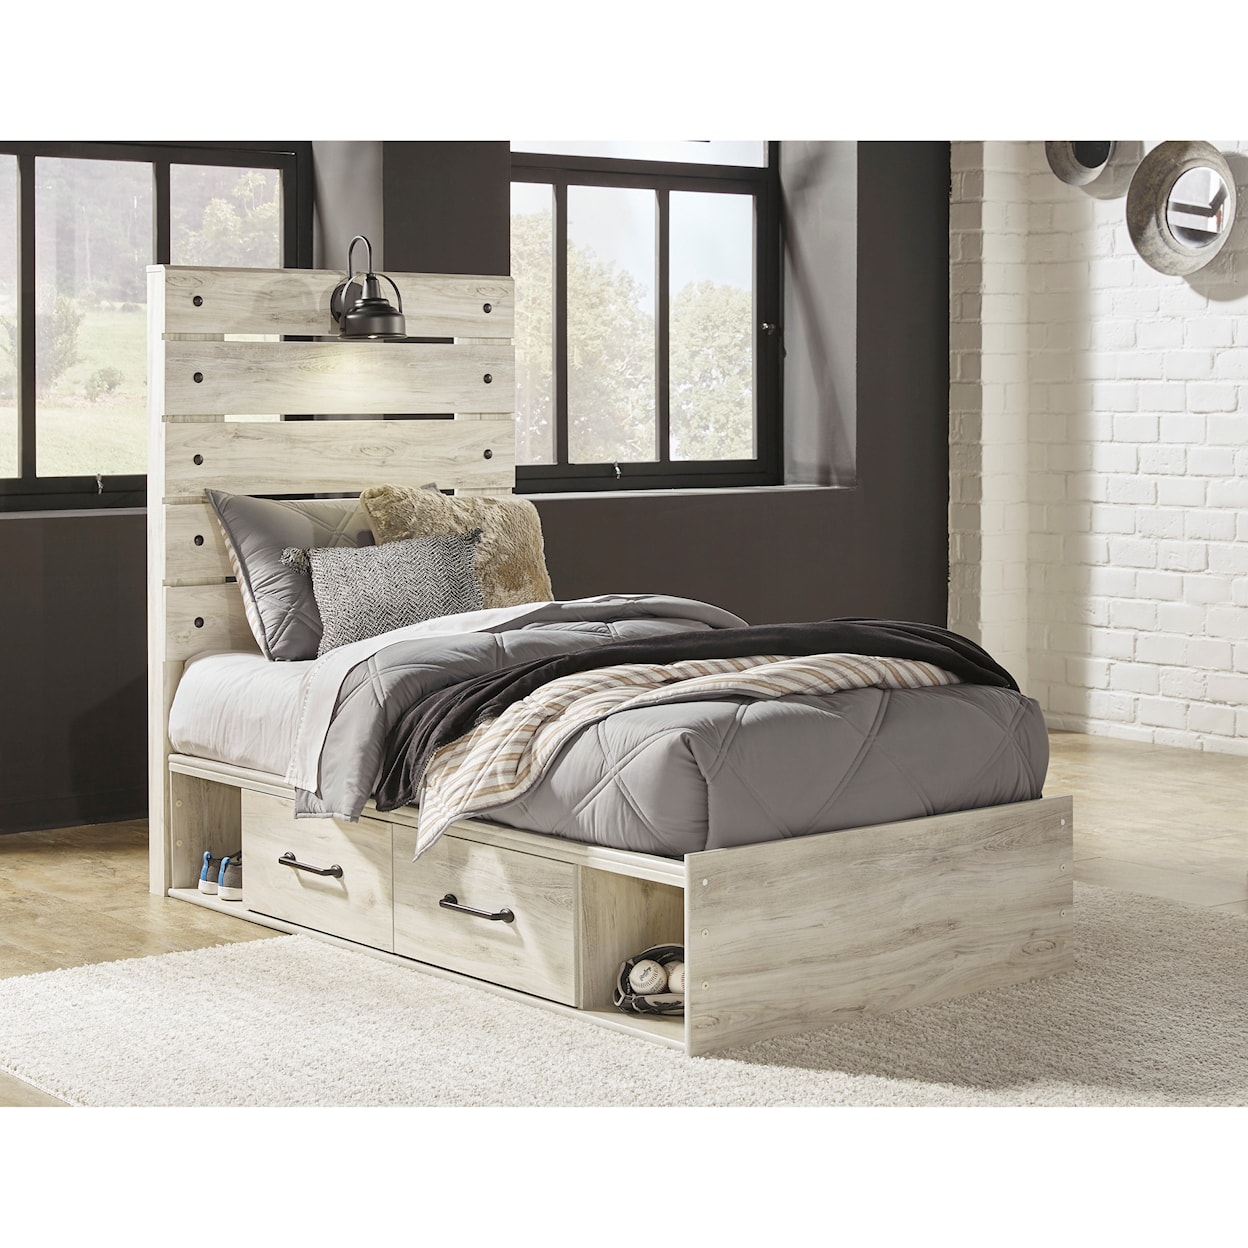 Ashley Furniture Signature Design Cambeck Twin Storage Bed with 2 Drawers